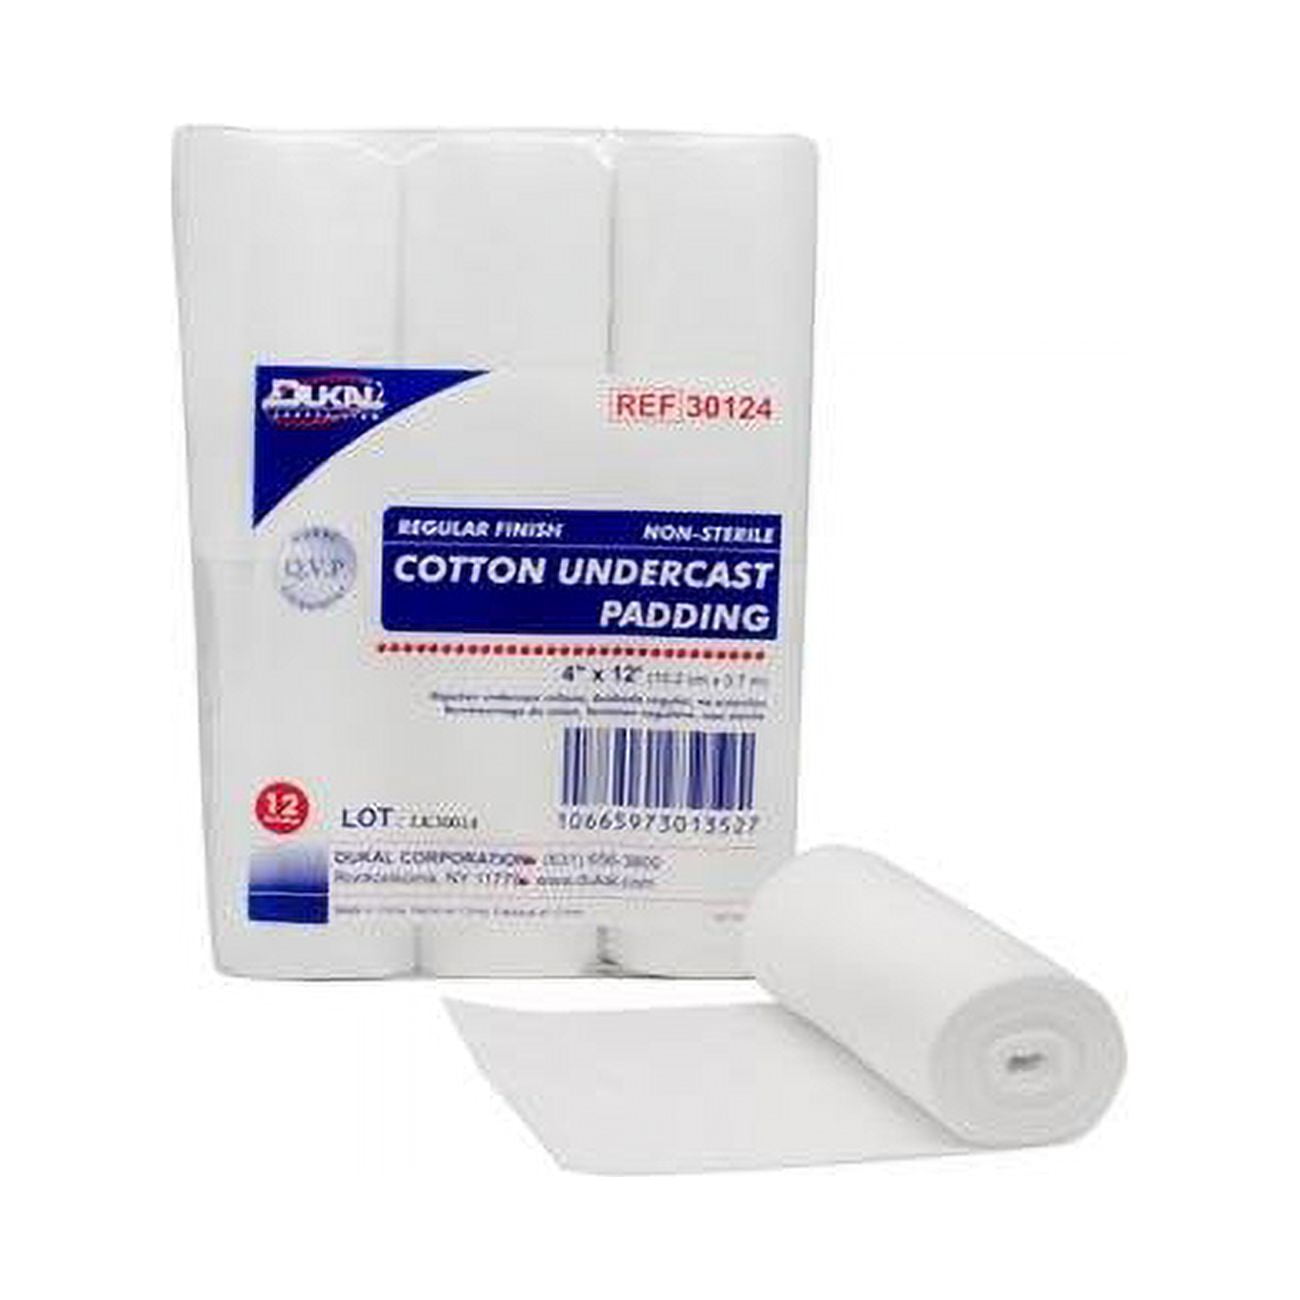 Picture of Dukal 30124 4 in. x 4 yards Cotton Undercast Padding, Regular